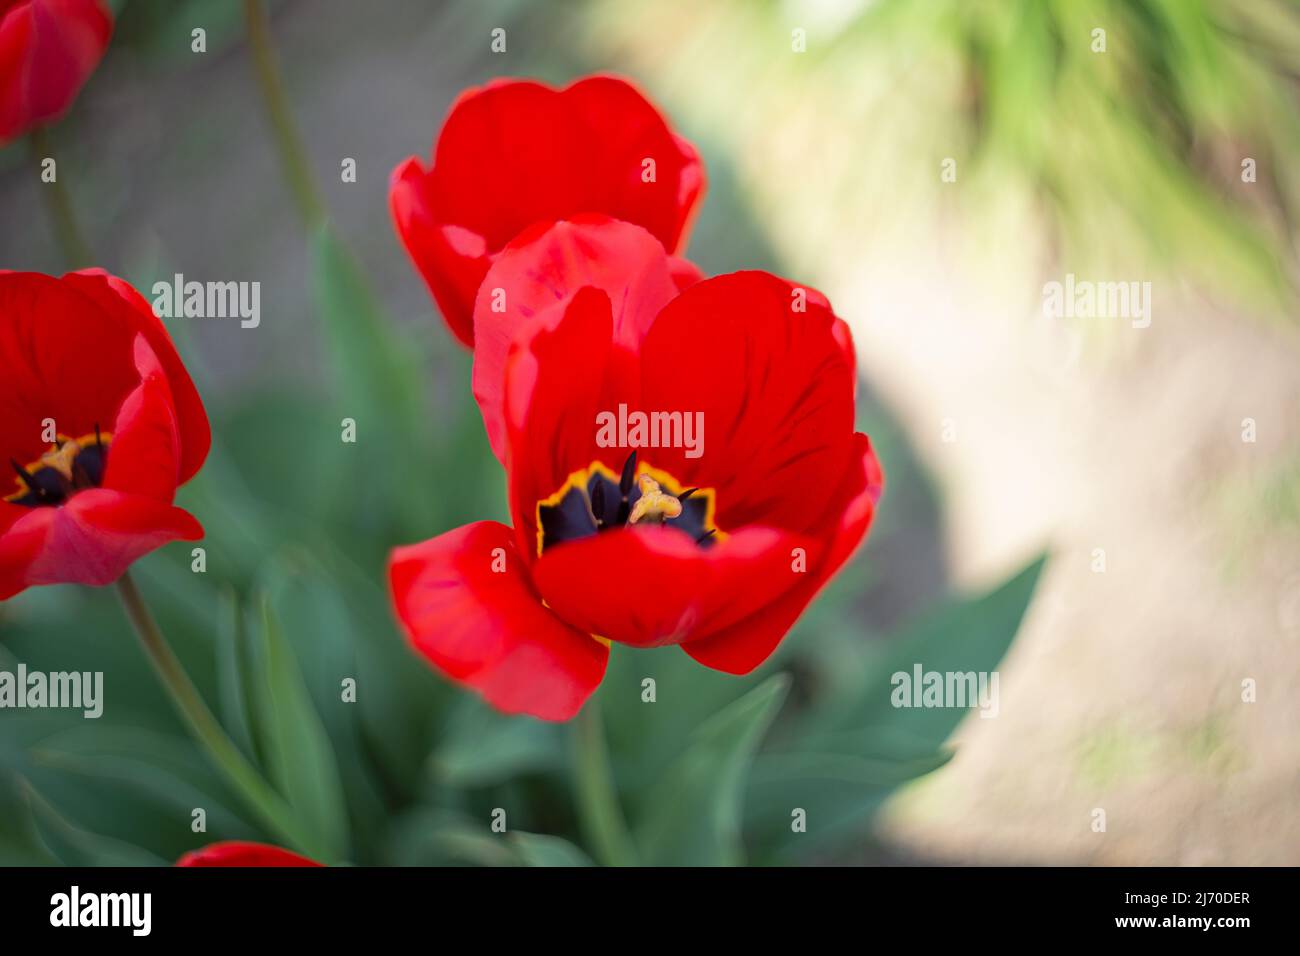 Closeup photography of group of red tulips,good as natural background. Stock Photo